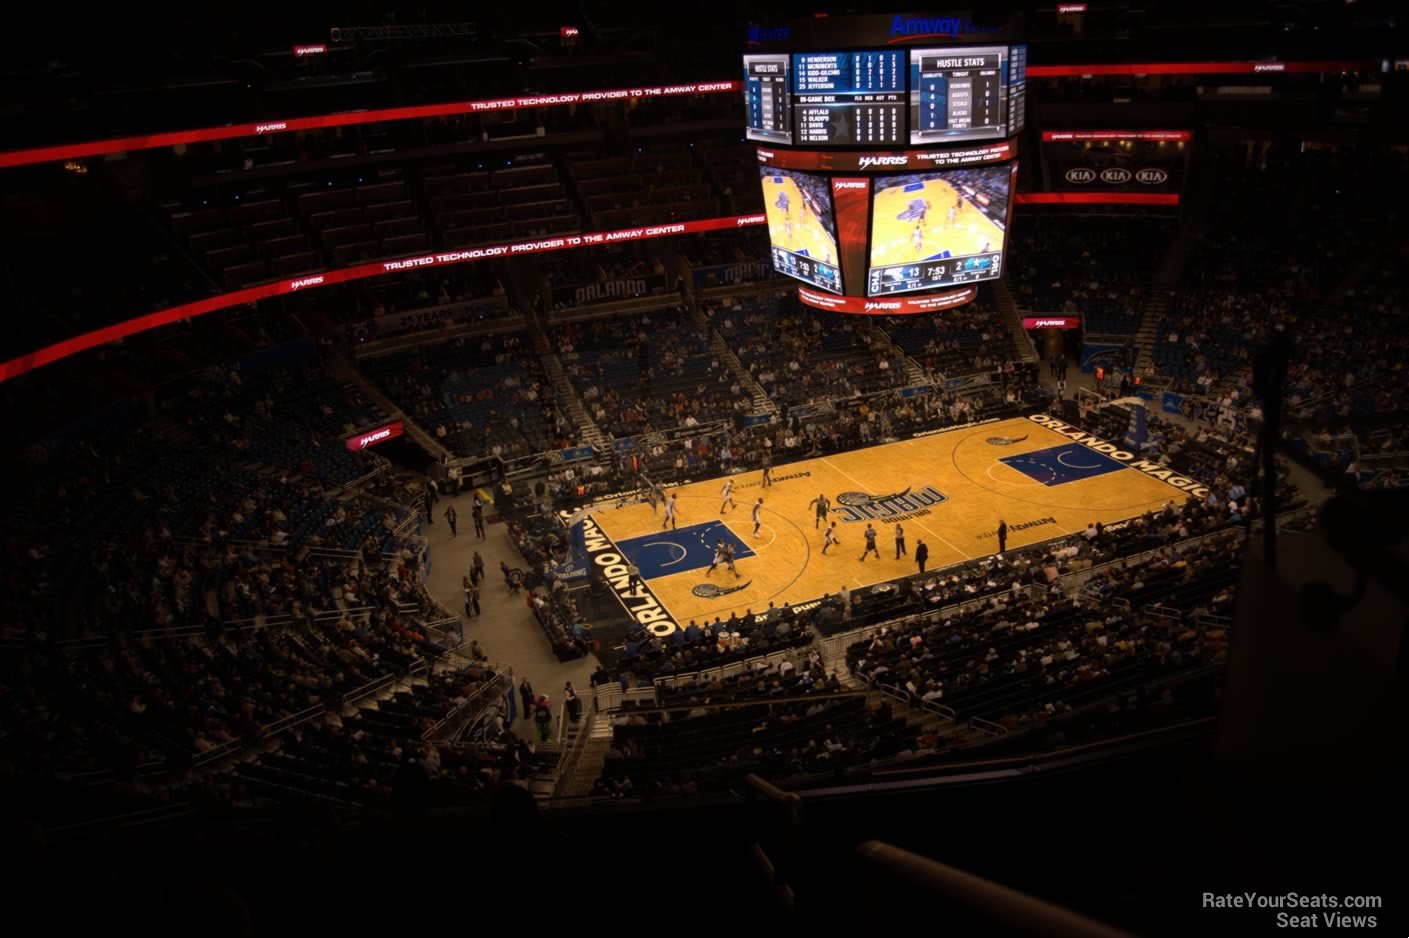 section 212 seat view  for basketball - amway center